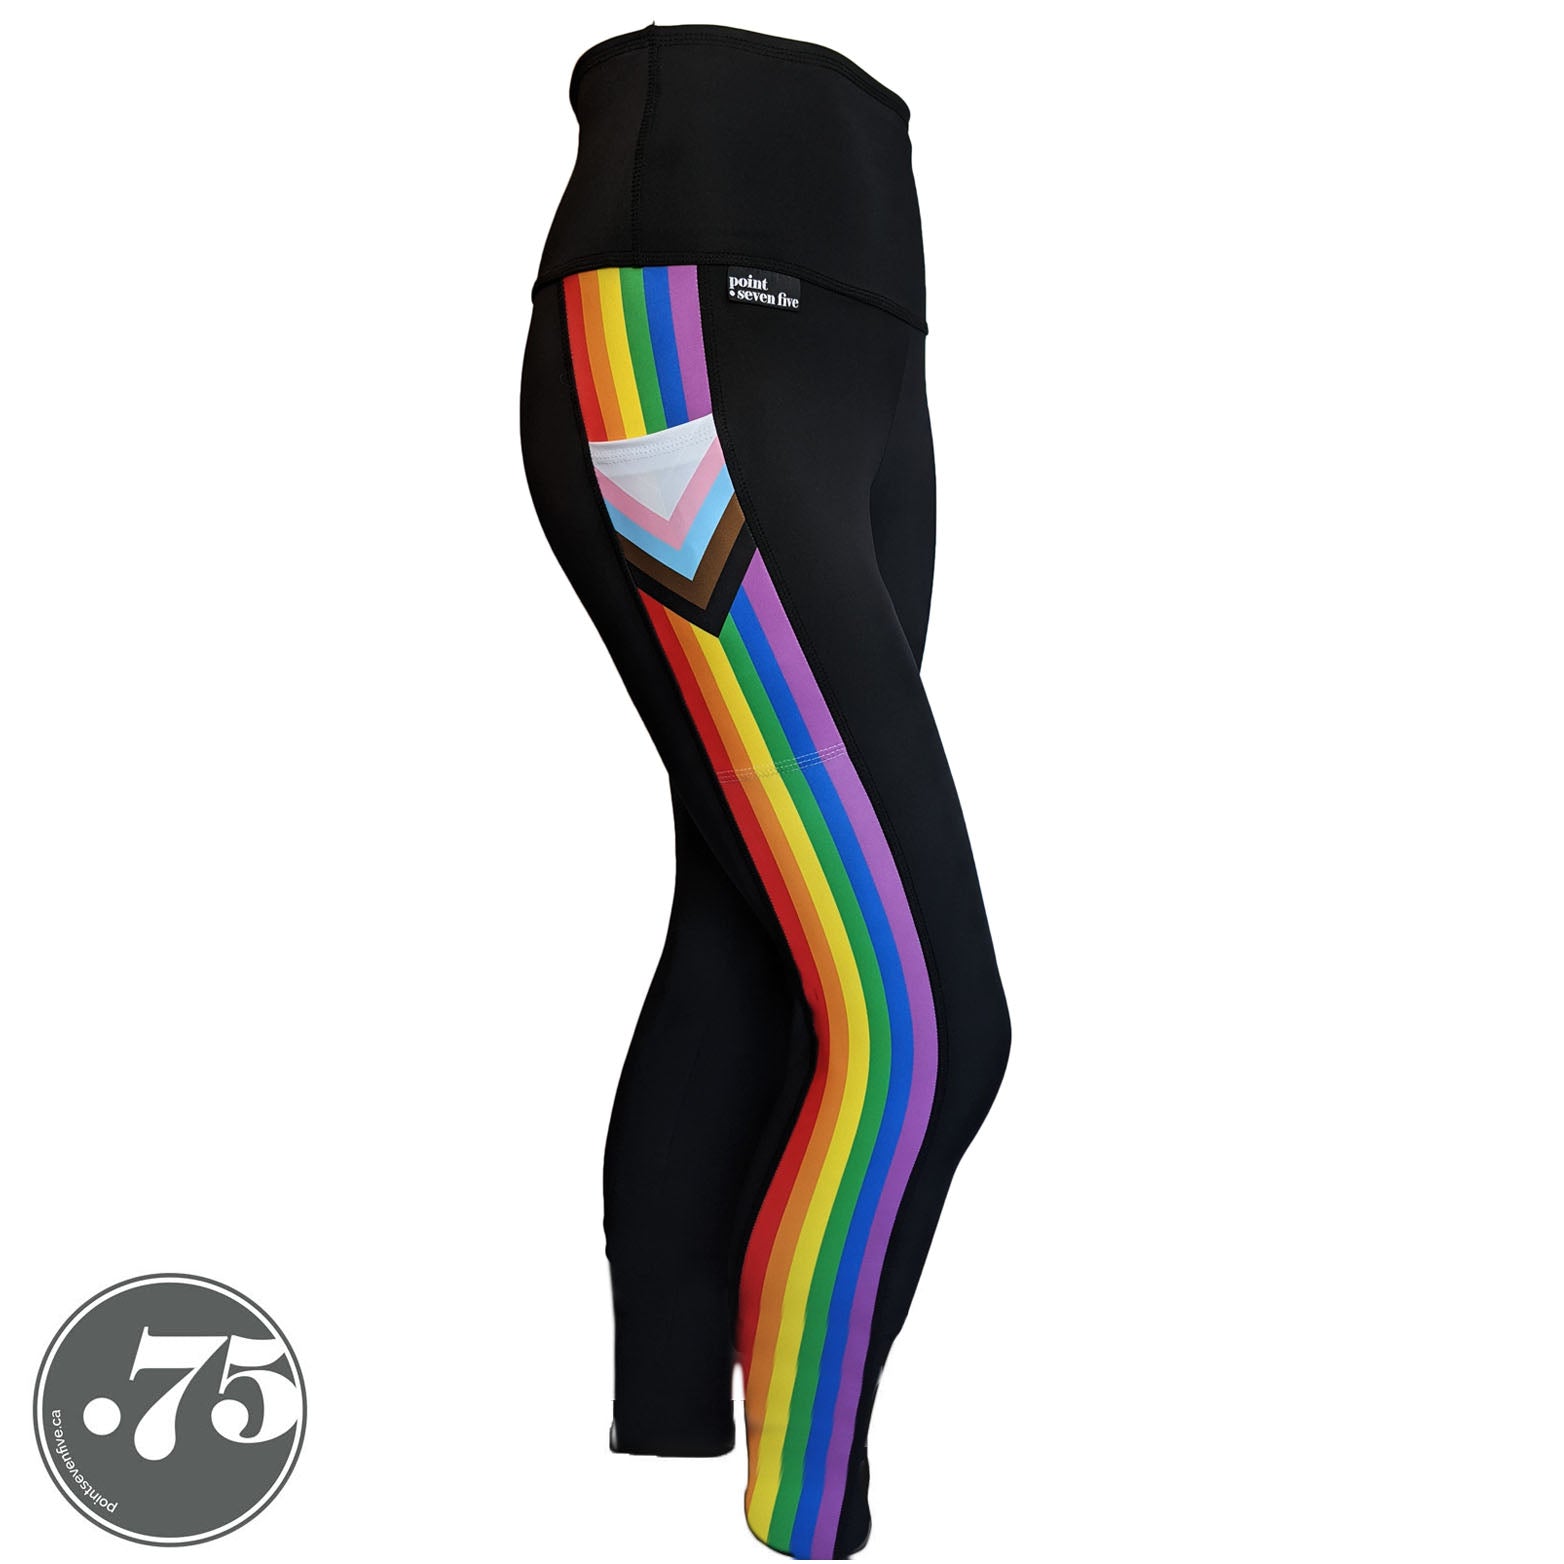 A pair of black spandex leggings on a mannequin, the leggings have a 3.5” wide stripe down the side that has a printed fabric with the stripes of the Progress Pride Flag vertically and the are chevrons placed at the top of the pocket. The stripes are red, orange, yellow, green, blue and purple. The chevrons are white, pink, light blue, brown and black and point down from the top of the pocket. 